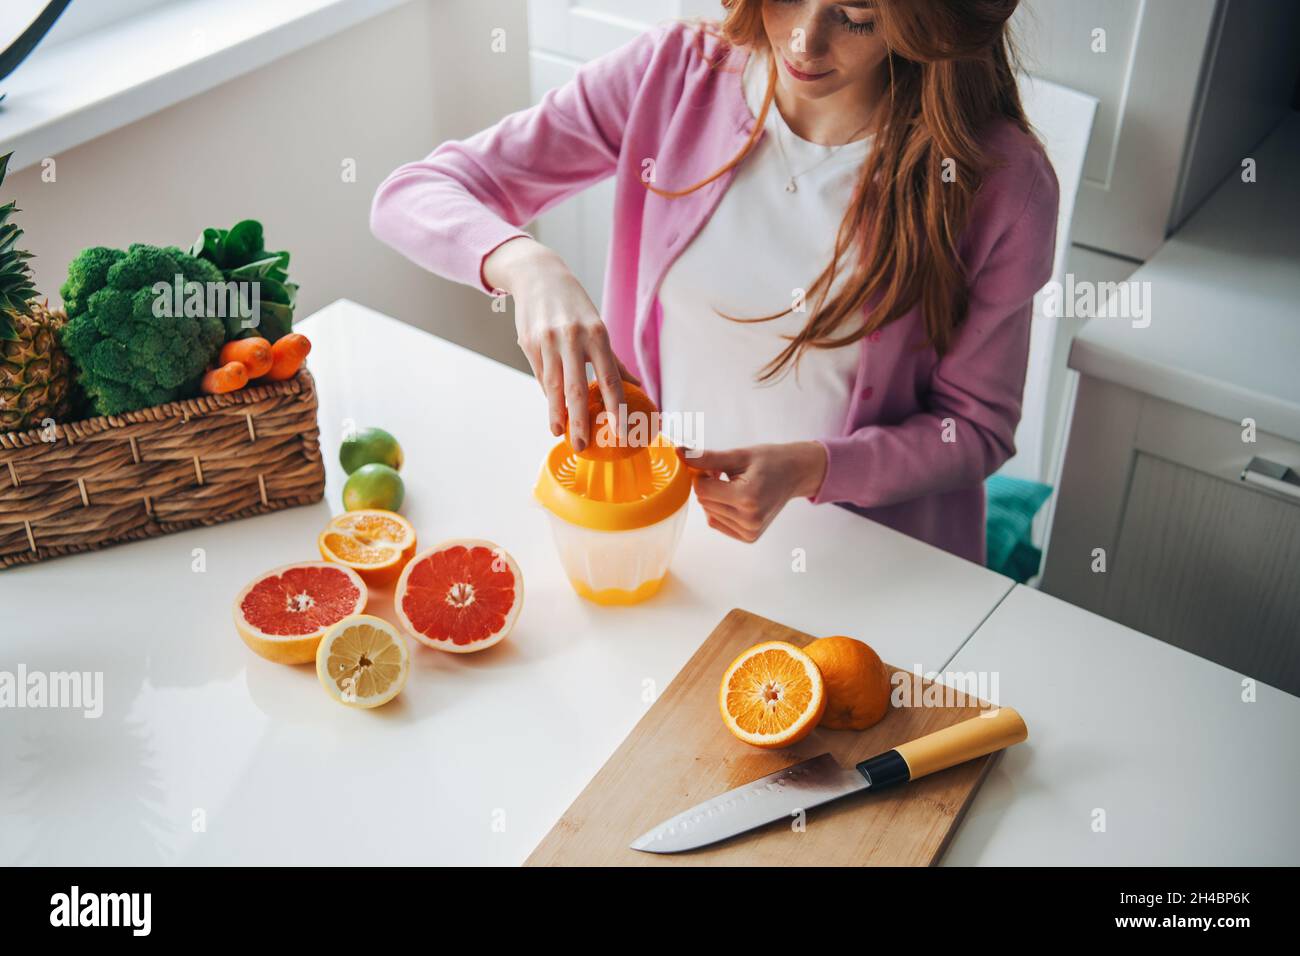 Red hair woman making citrus fruits juice for healthy lifestyle design. Healthy diet. Fruit juice. Stock Photo